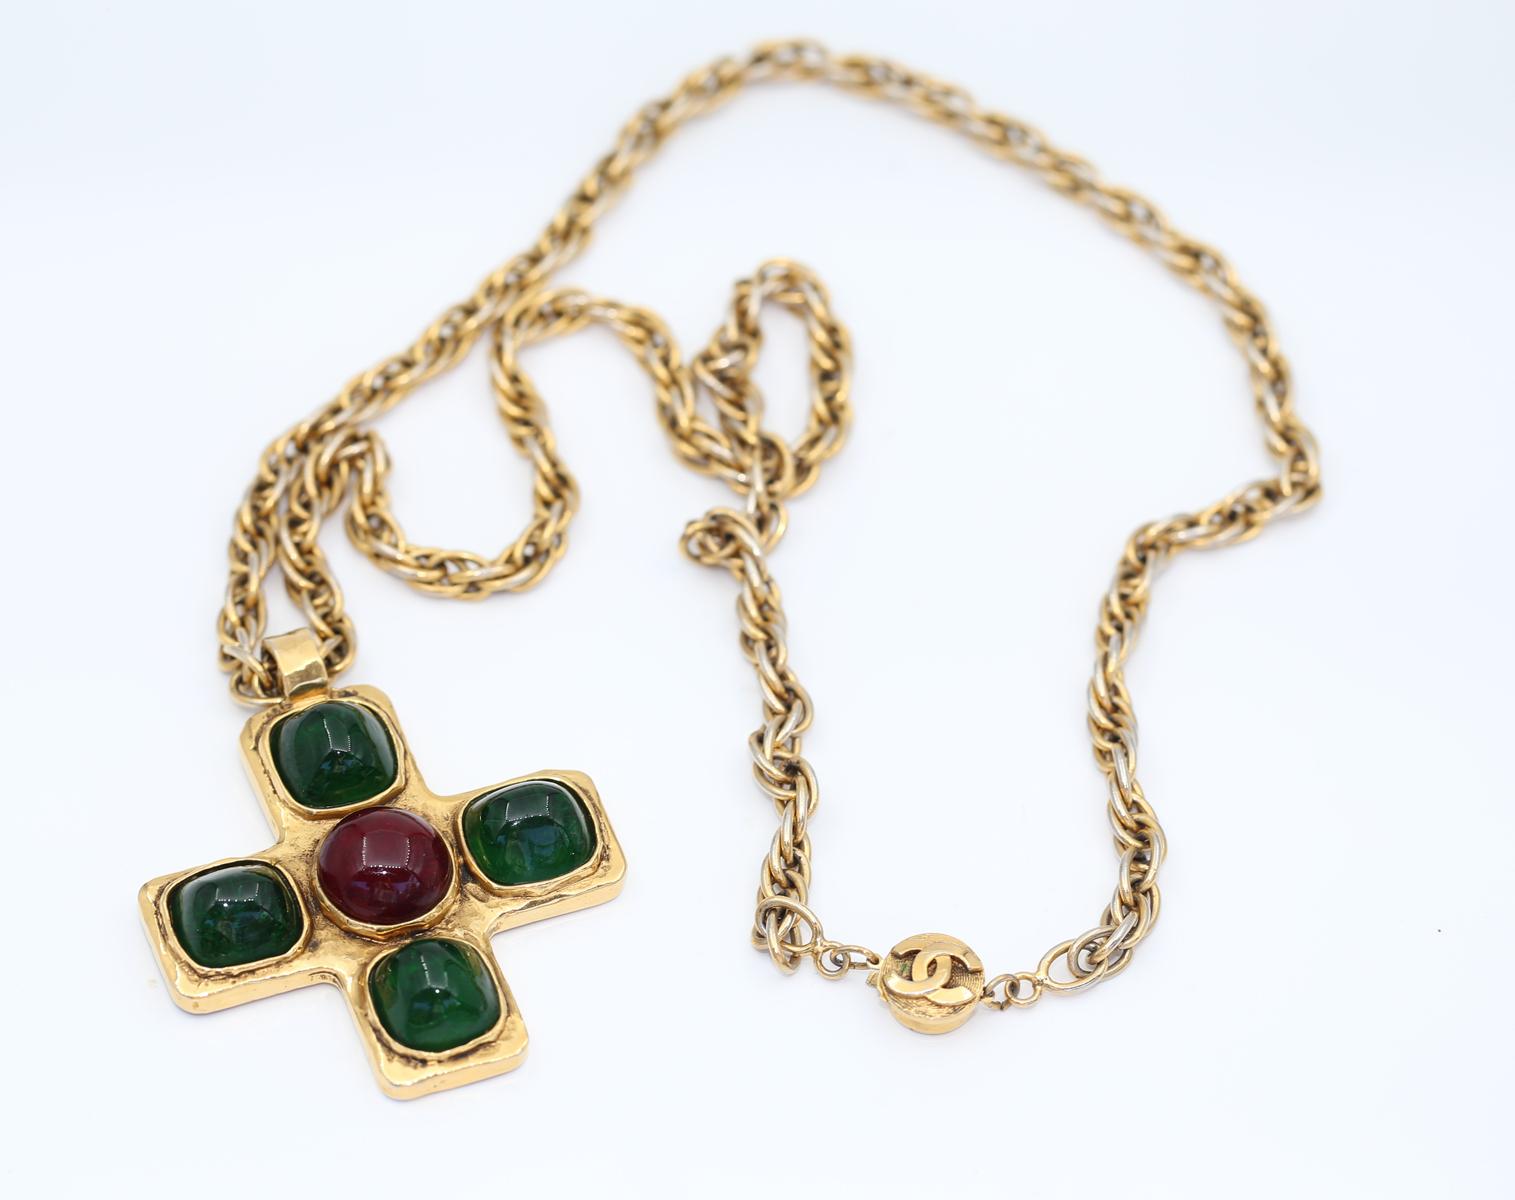 Vintage 1970es CHANEL Gripoix Iconic Cross Pendant.
The items is truly massive with Chanel Cross Red and Green Gripoix Glass cabochons. The chain is really long and has a Chanel sign on the lock. It is a real fashion statement that is hard to deny.